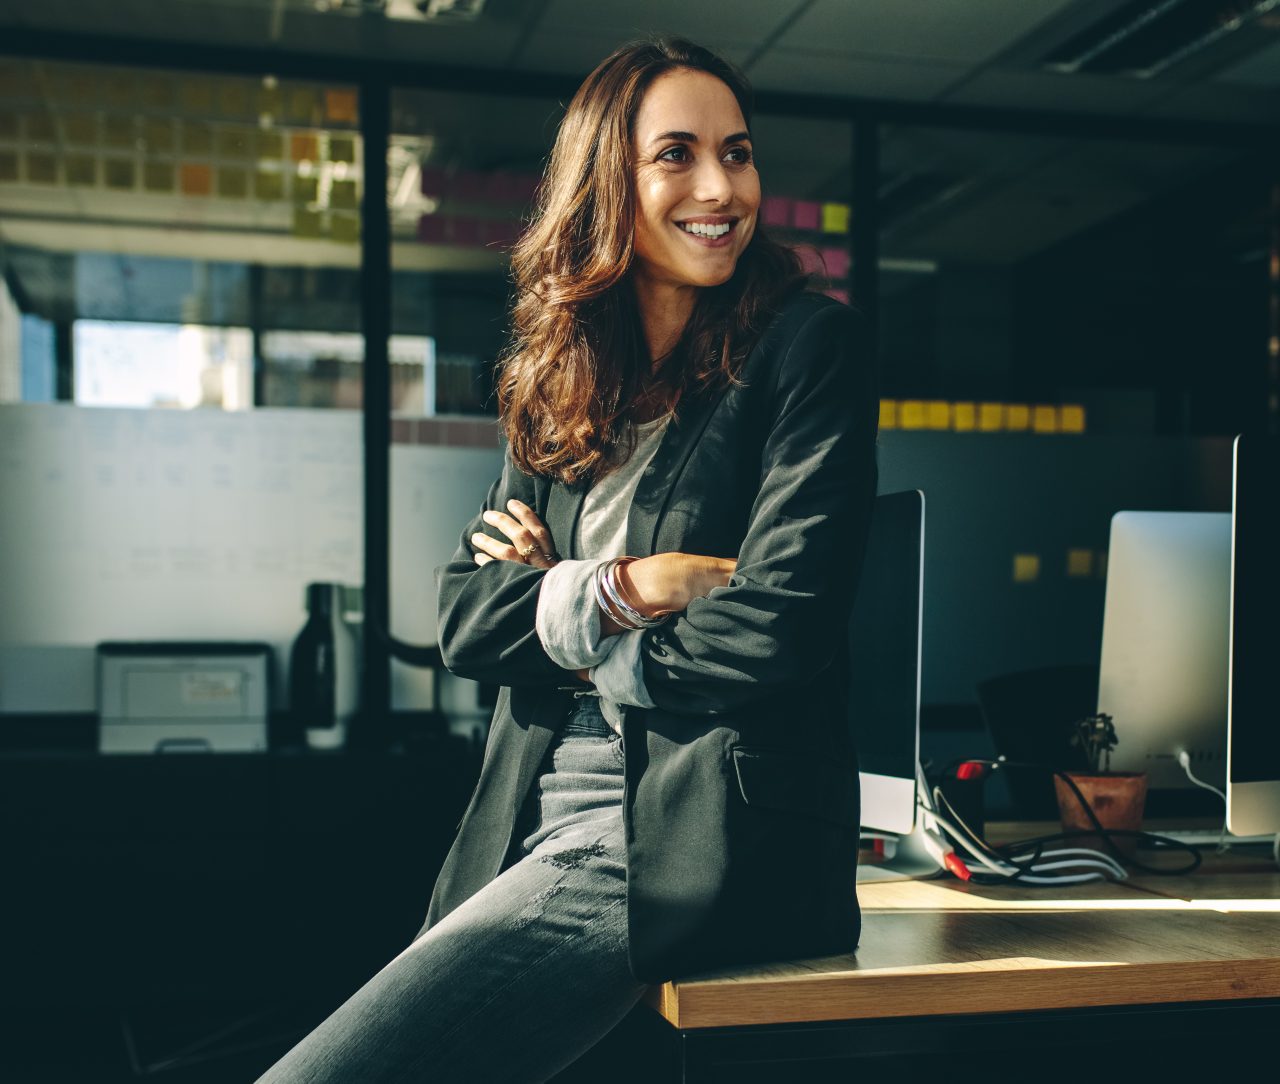 Smiling businesswoman sitting on her desk. Female business professionals sitting in her office looking away and smiling.